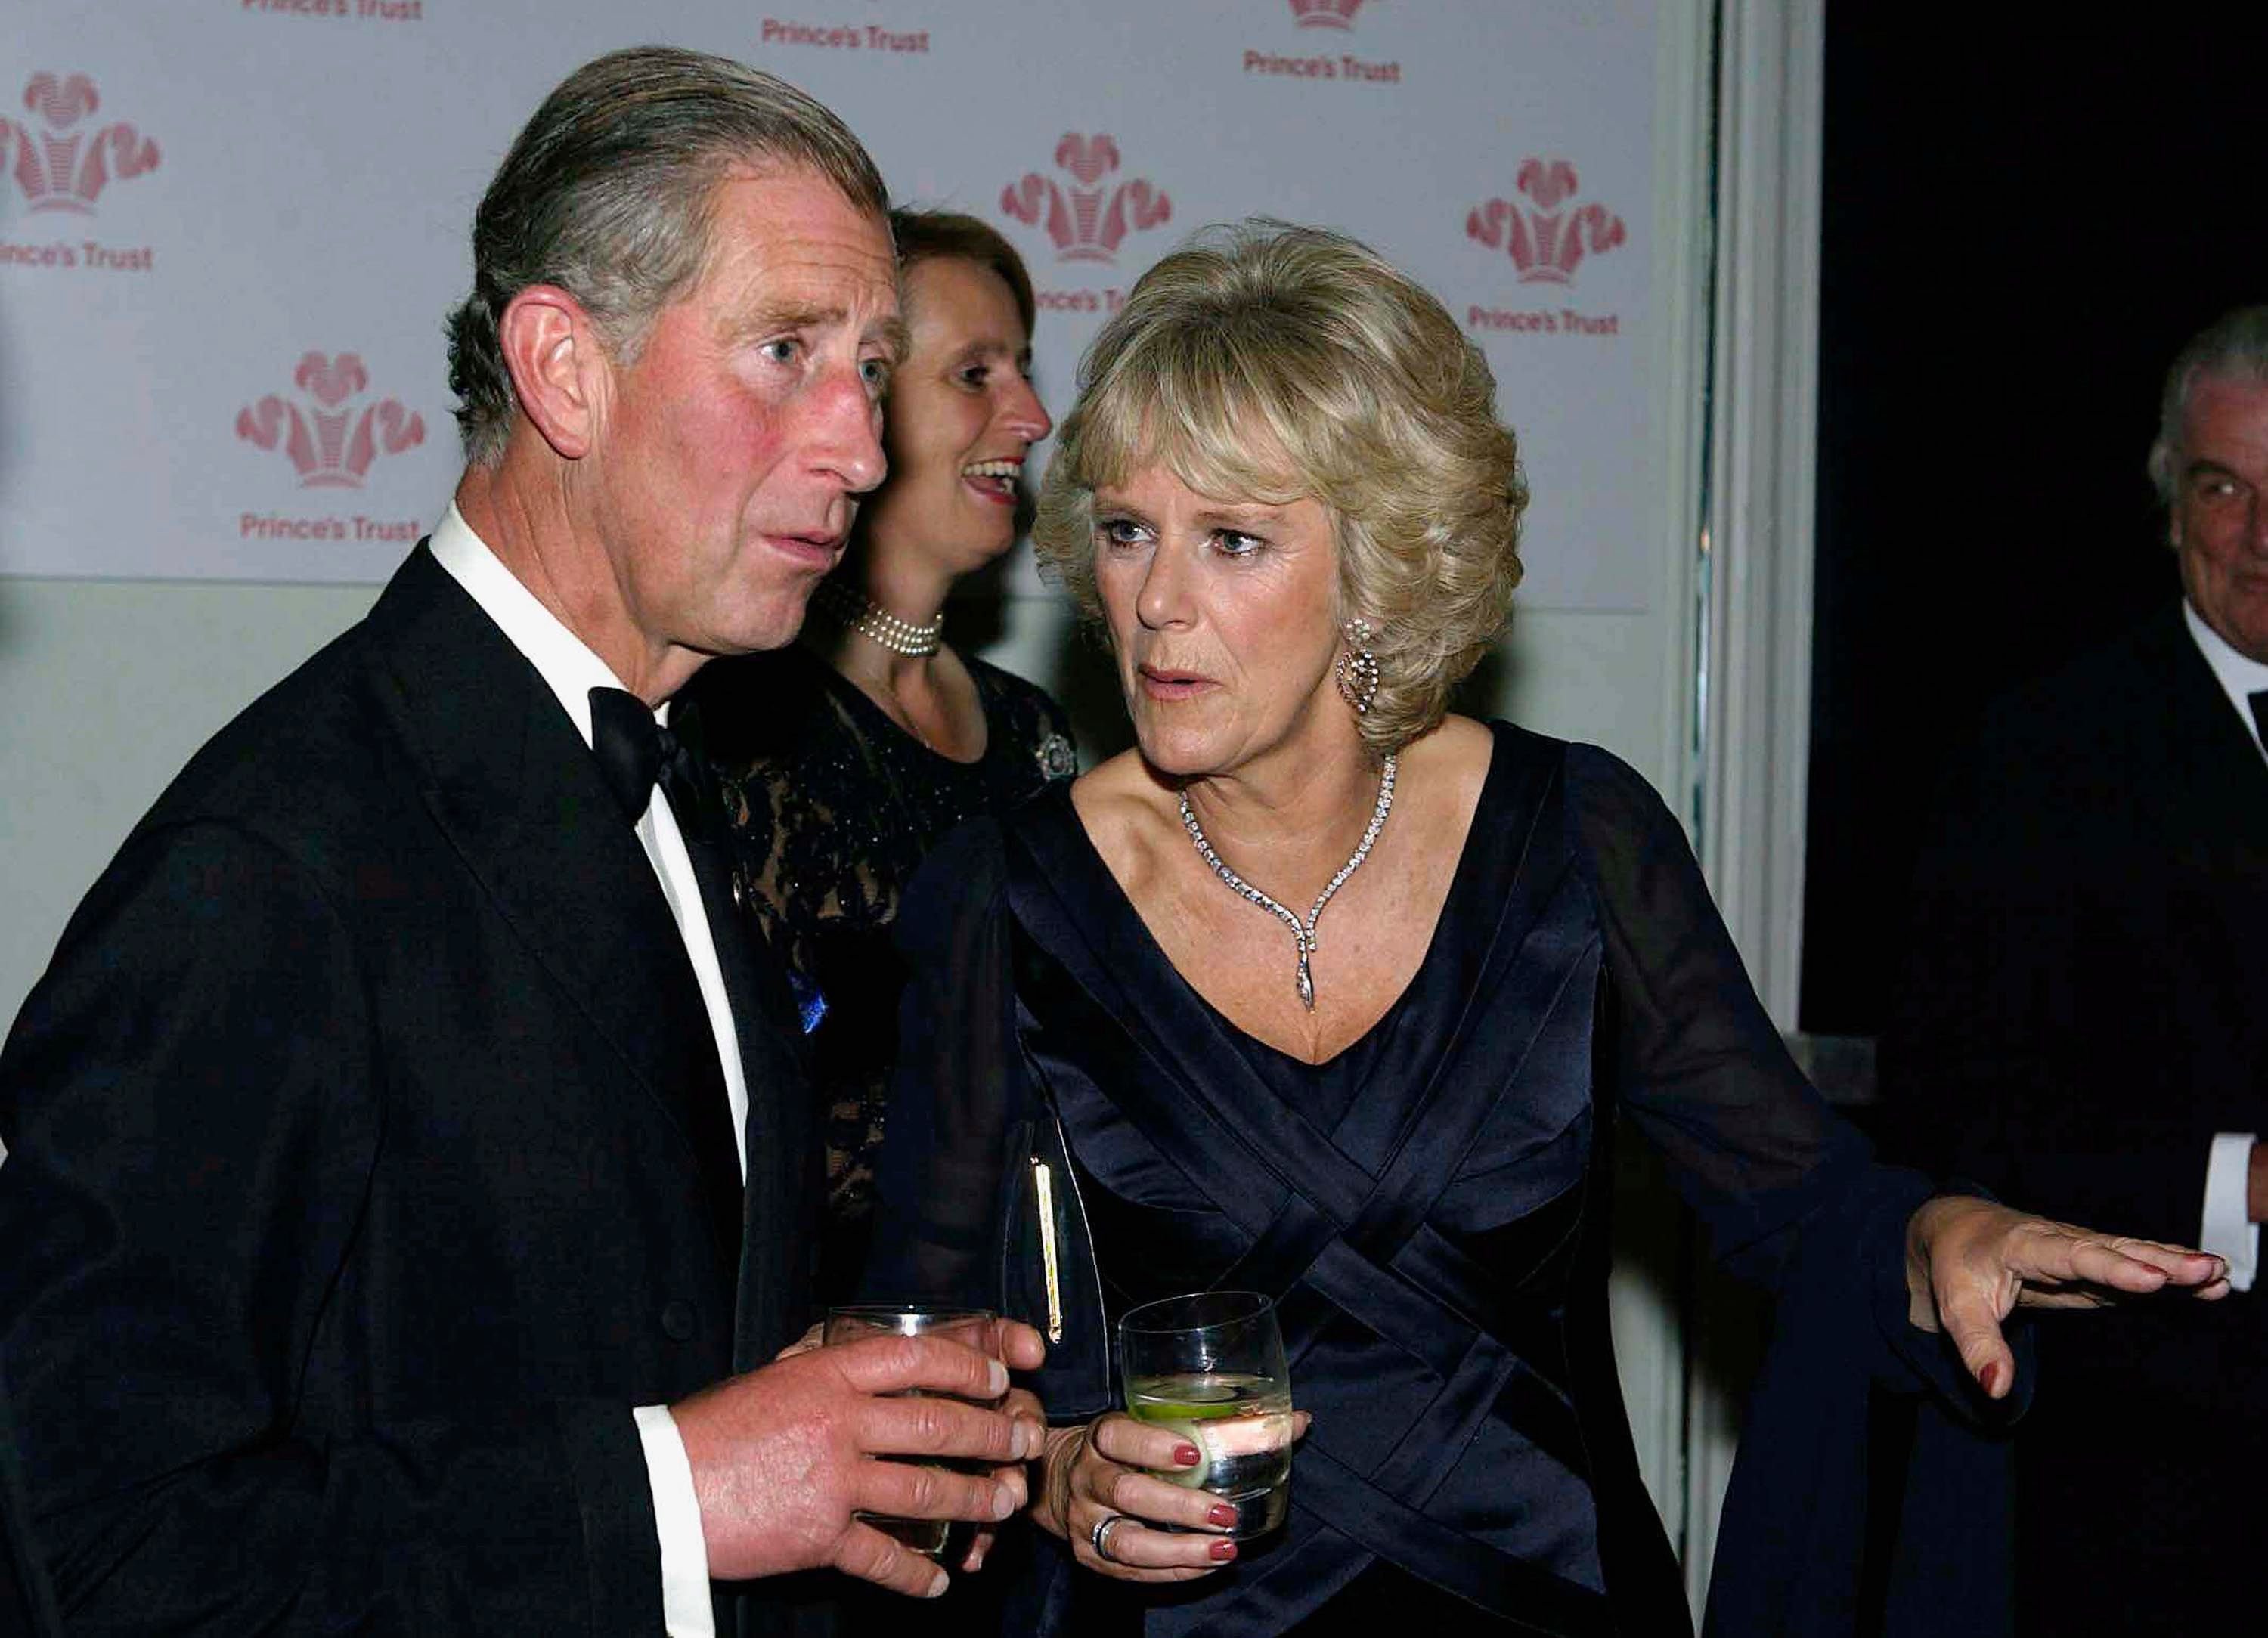 Prince Charles and Duchess Camilla at the after-party for the "Fashion Rocks" concert and fashion show on October 15, 2003, in London. | Source: Anwar Hussein/ROTA/Getty Images